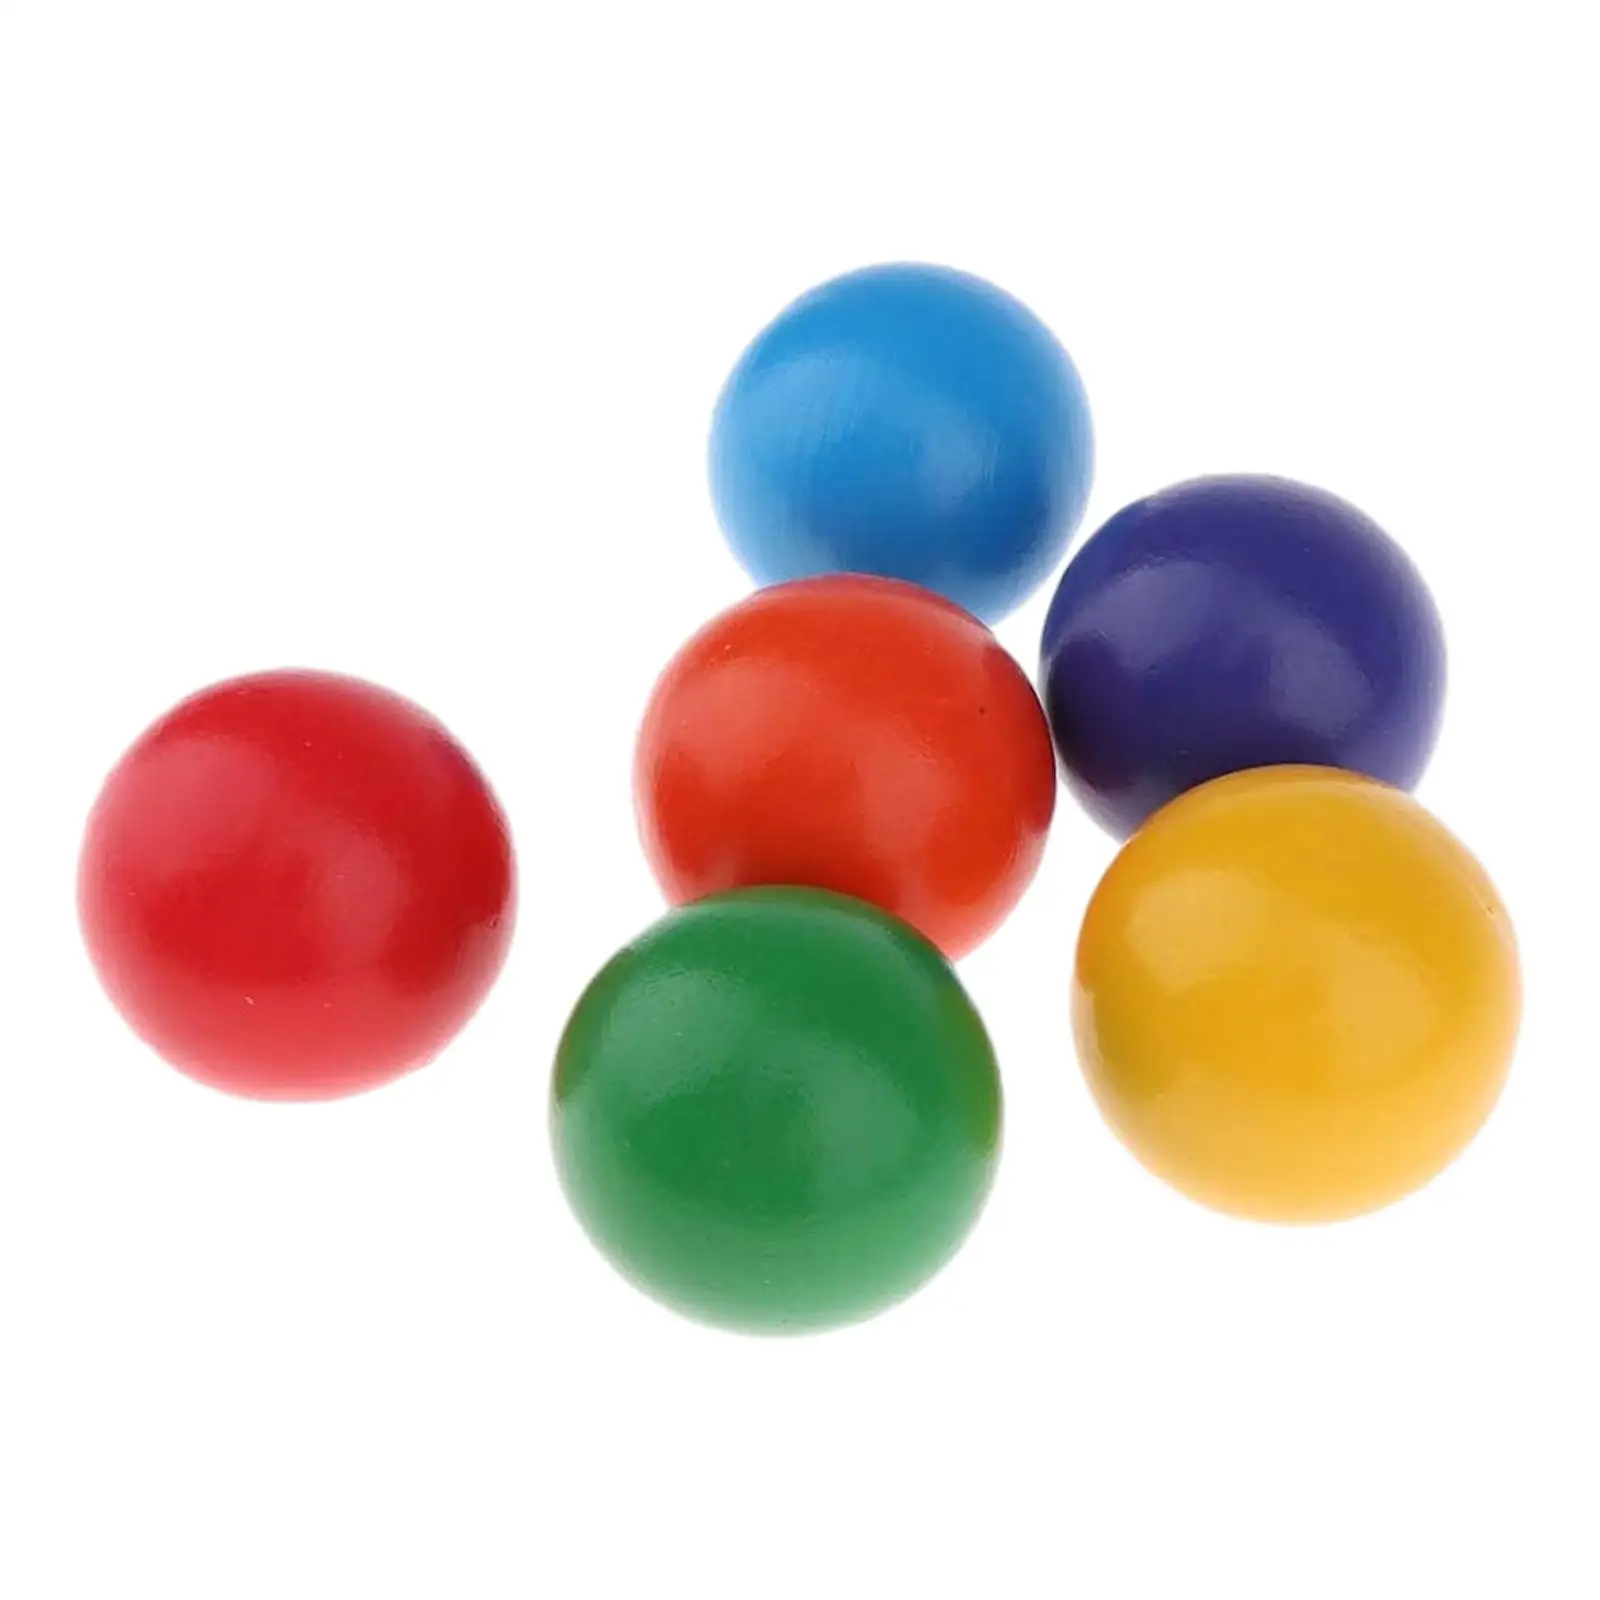 

6 Pieces Montessori Wooden Balls 1.77'' Gifts Inspire Curiosity Color Sorting Toys for Kids Boys Age 3 4 5 6 Girls Children